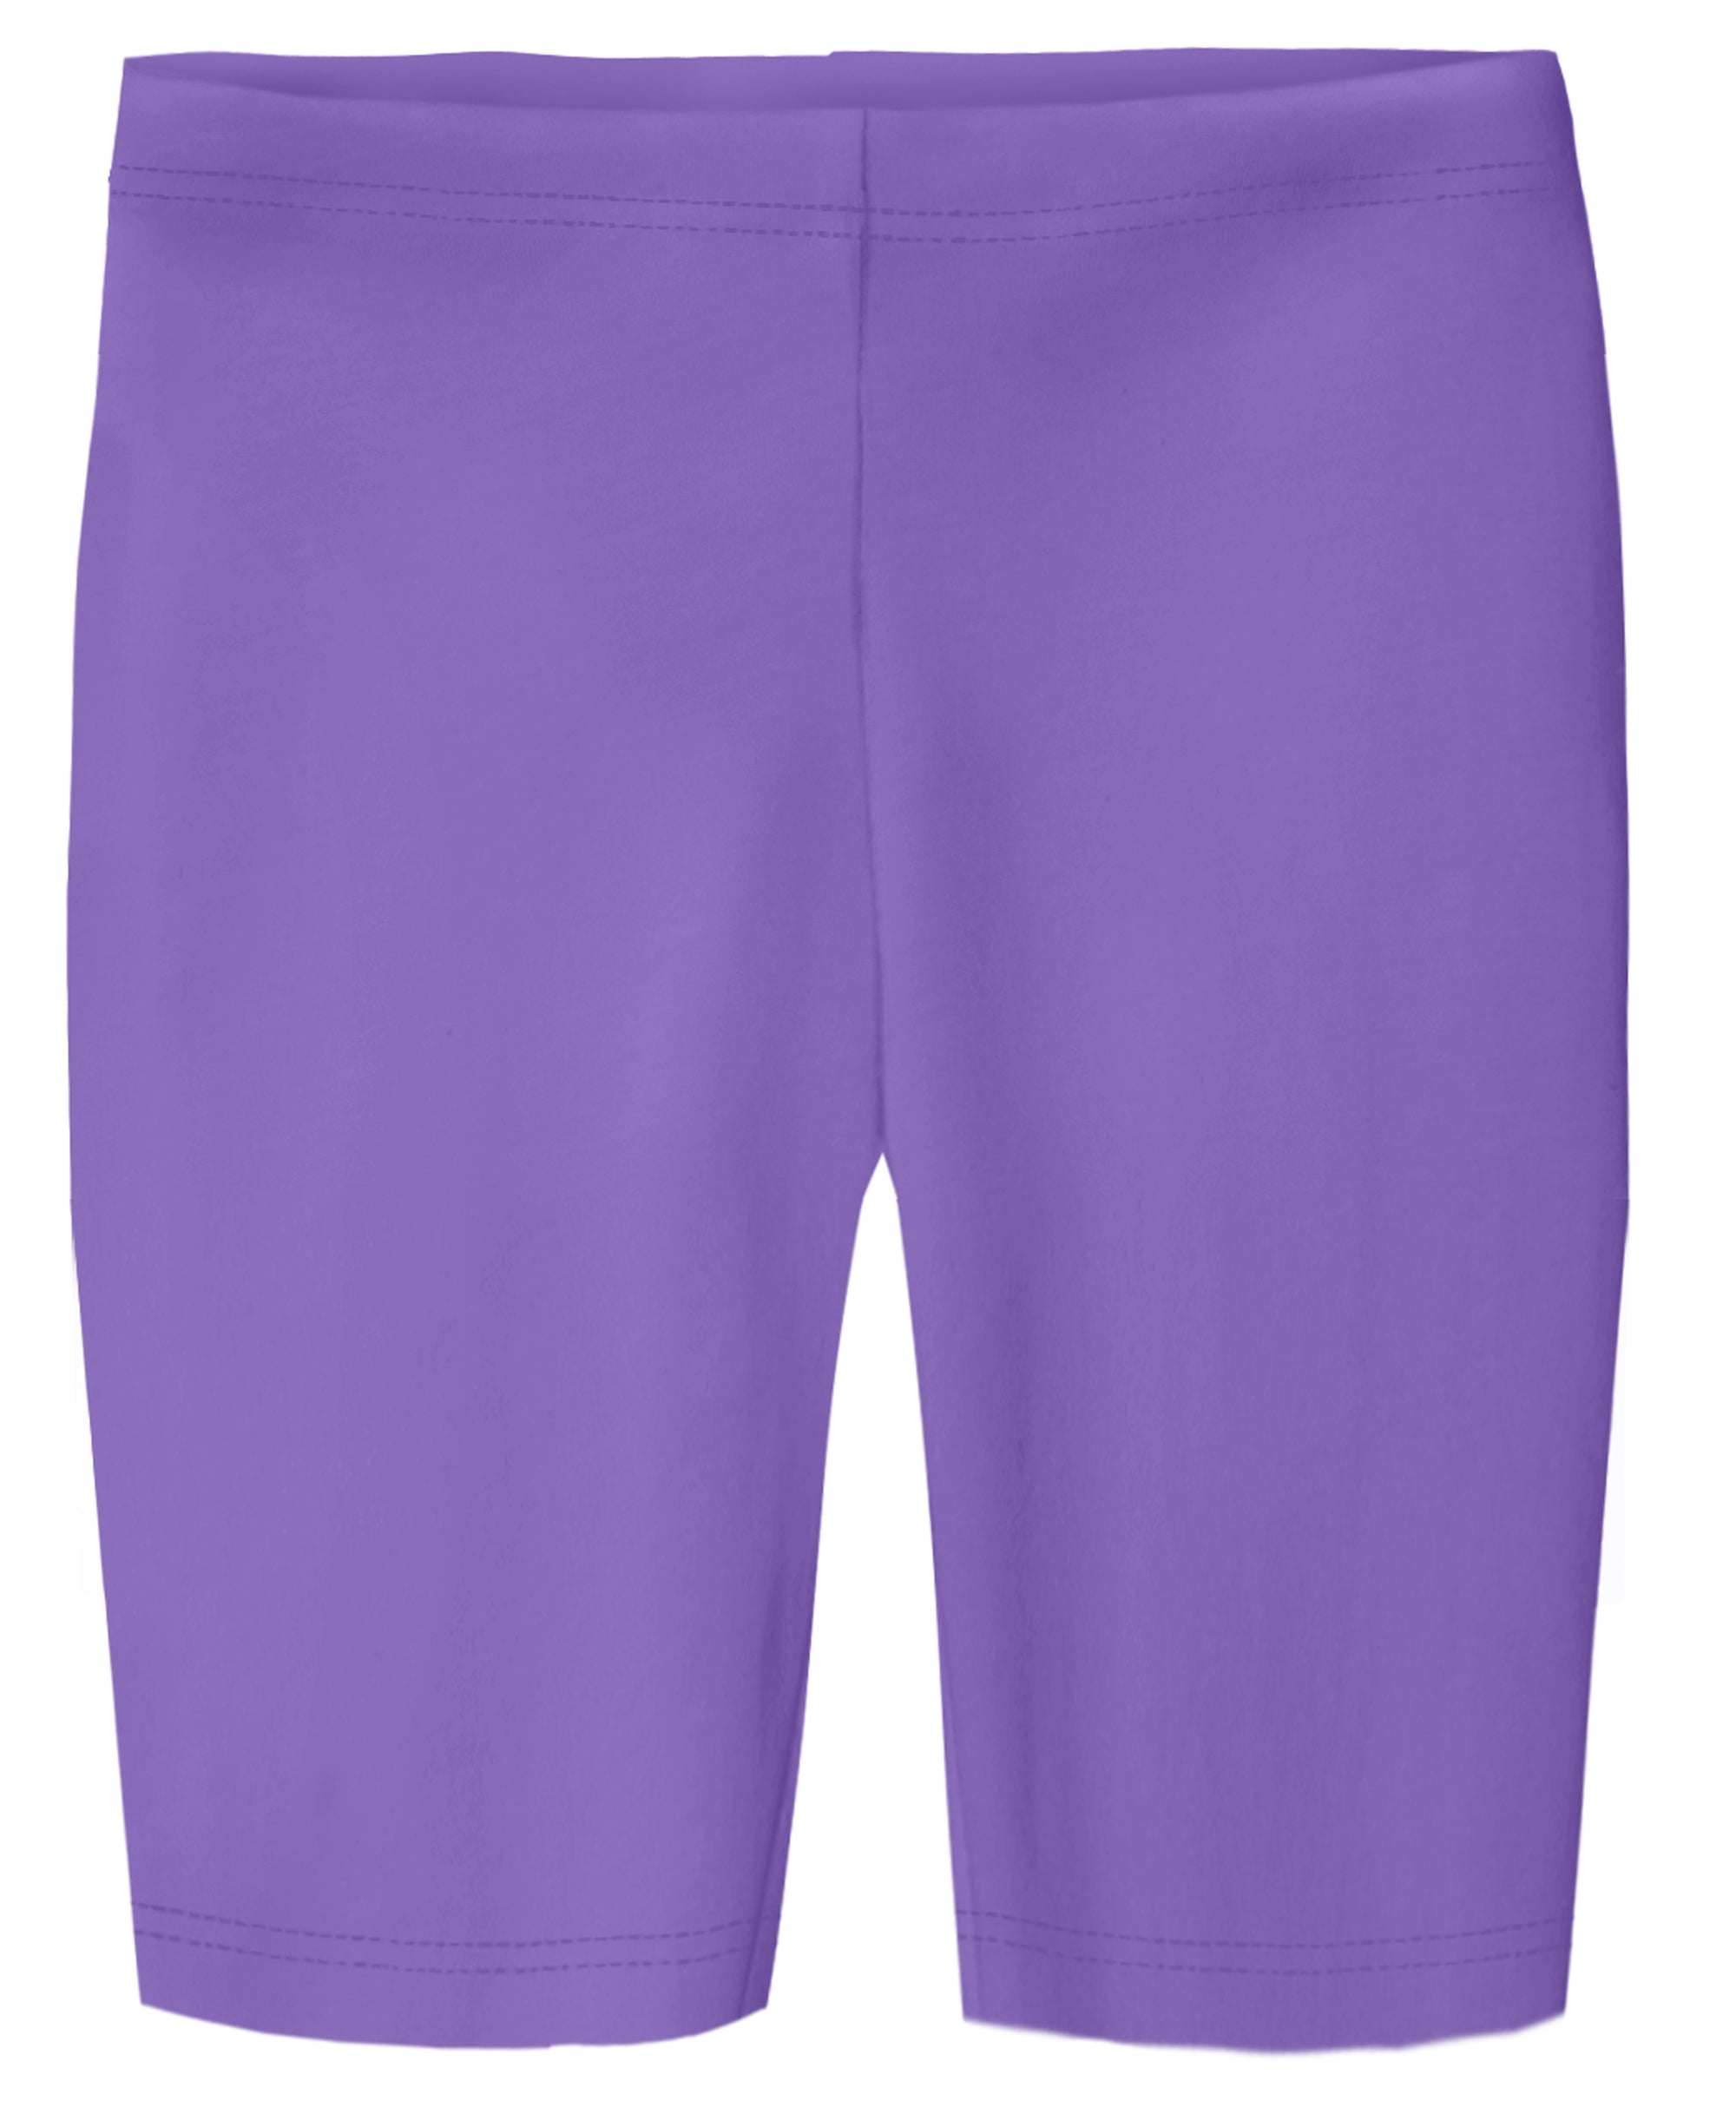 NEW PURPLE Athletic Shorts Girls Size 14 - 16 PLUS Quick Dry Cute